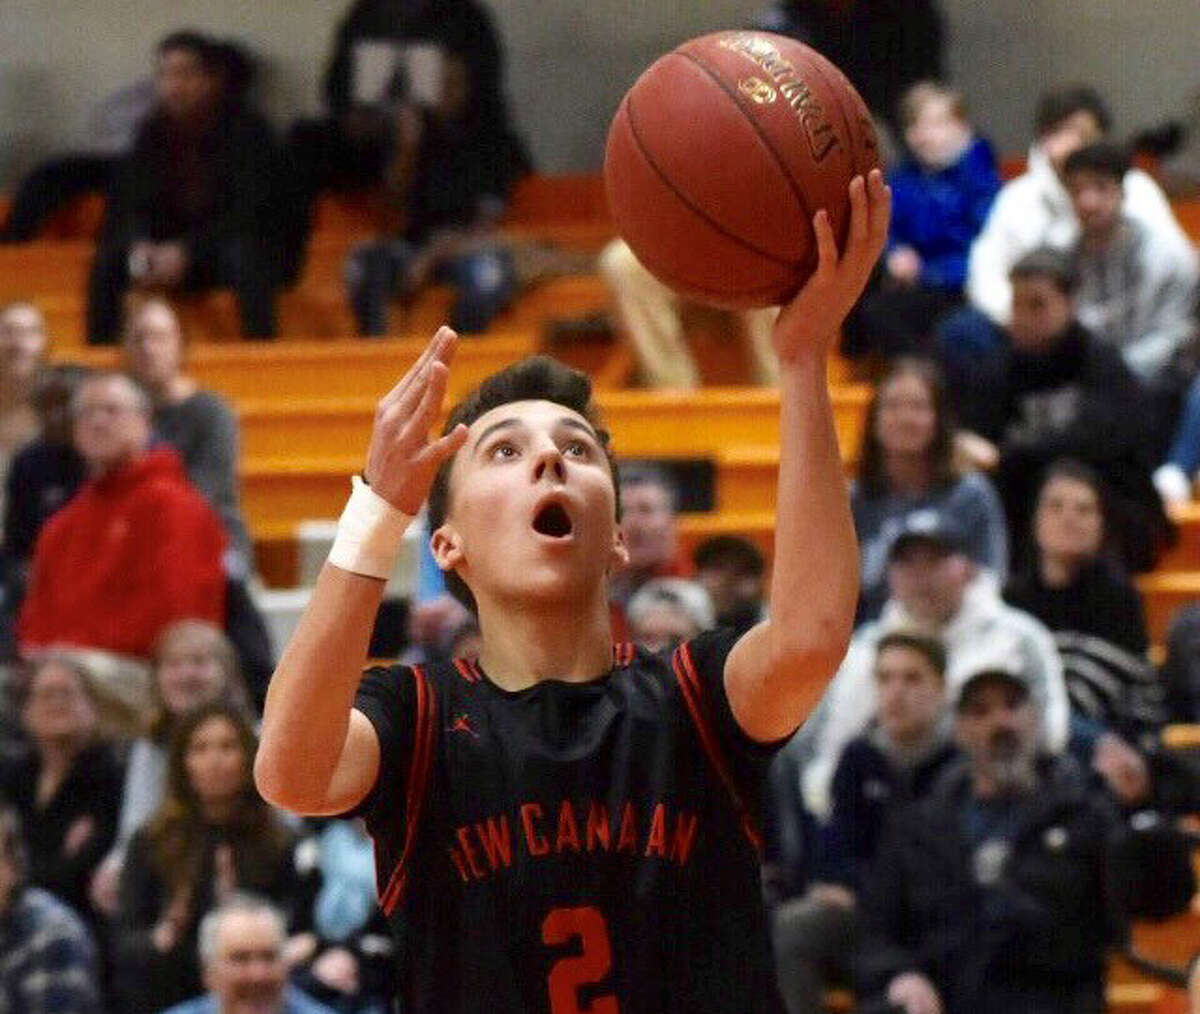 New Canaan’s Aaron Fishman (2) goes up for two points during the Rams’ boys basketball game against Stamford at Stamford High School on Friday, Jan. 17, 2020.